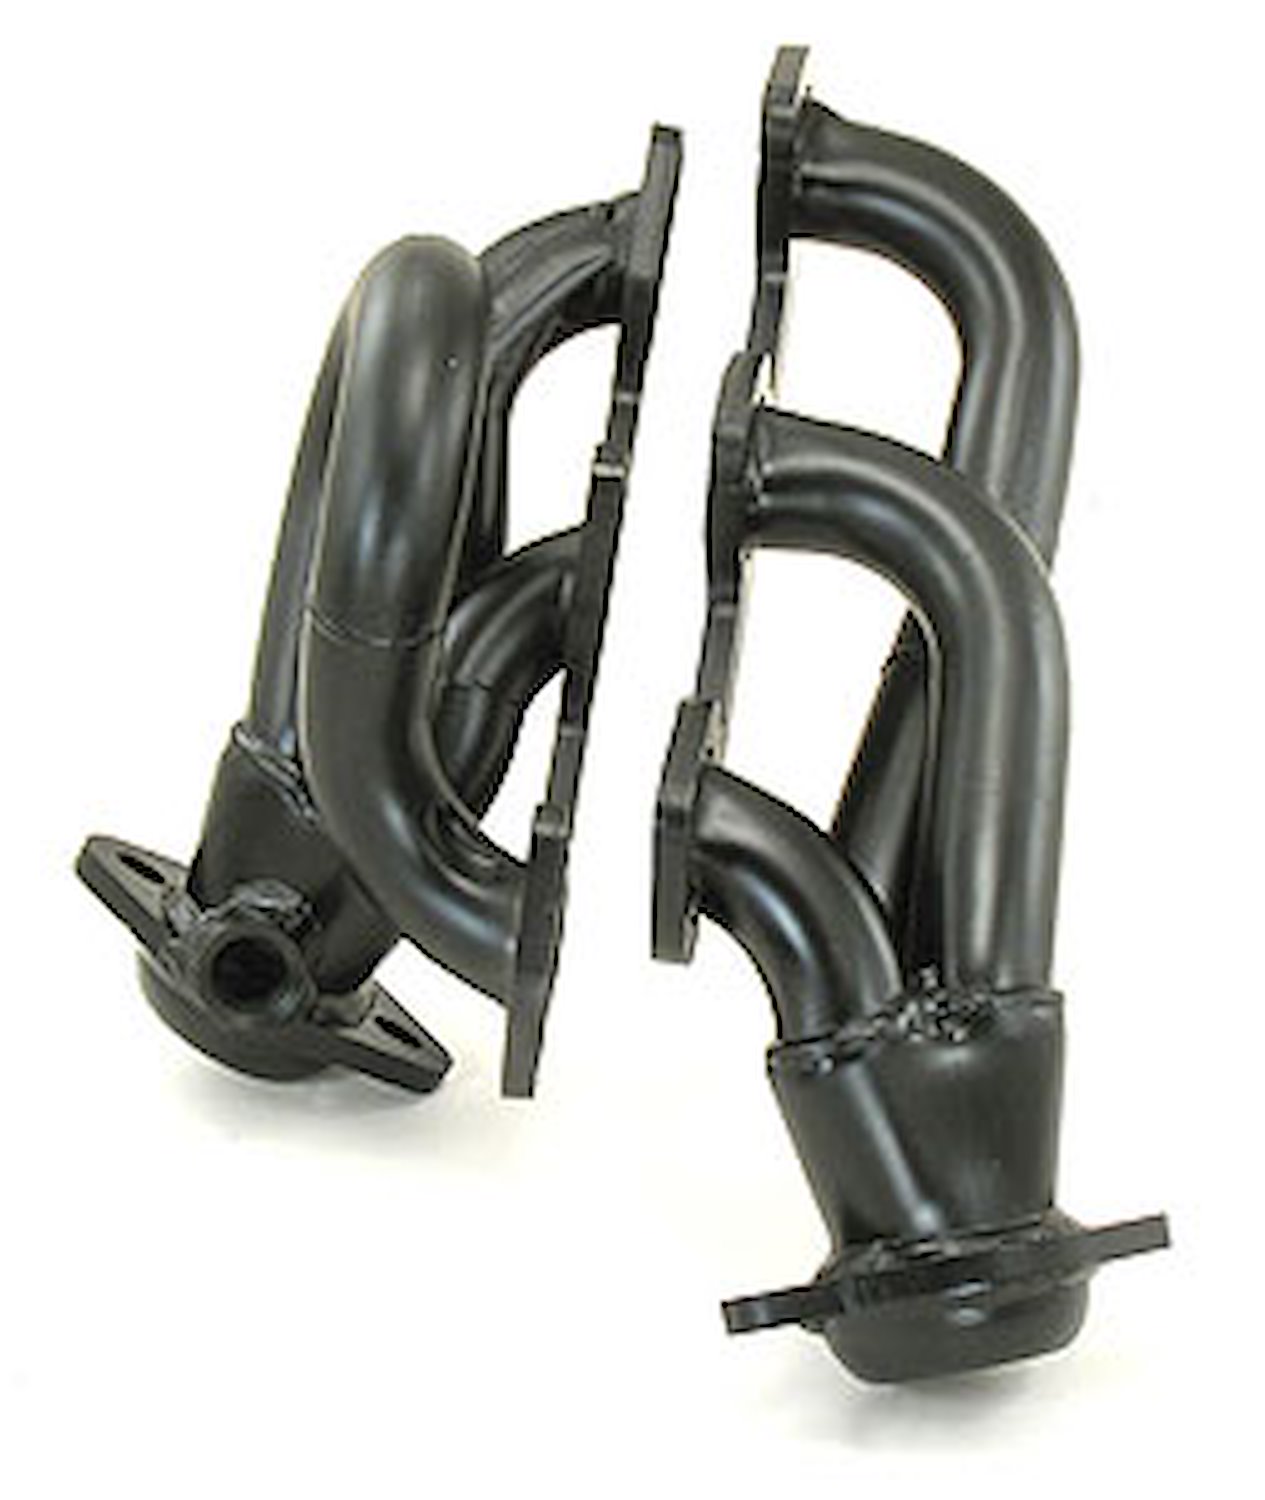 Painted Truck Headers 1997-2000 Ford Ranger/Explorer 2/4WD 4.0L